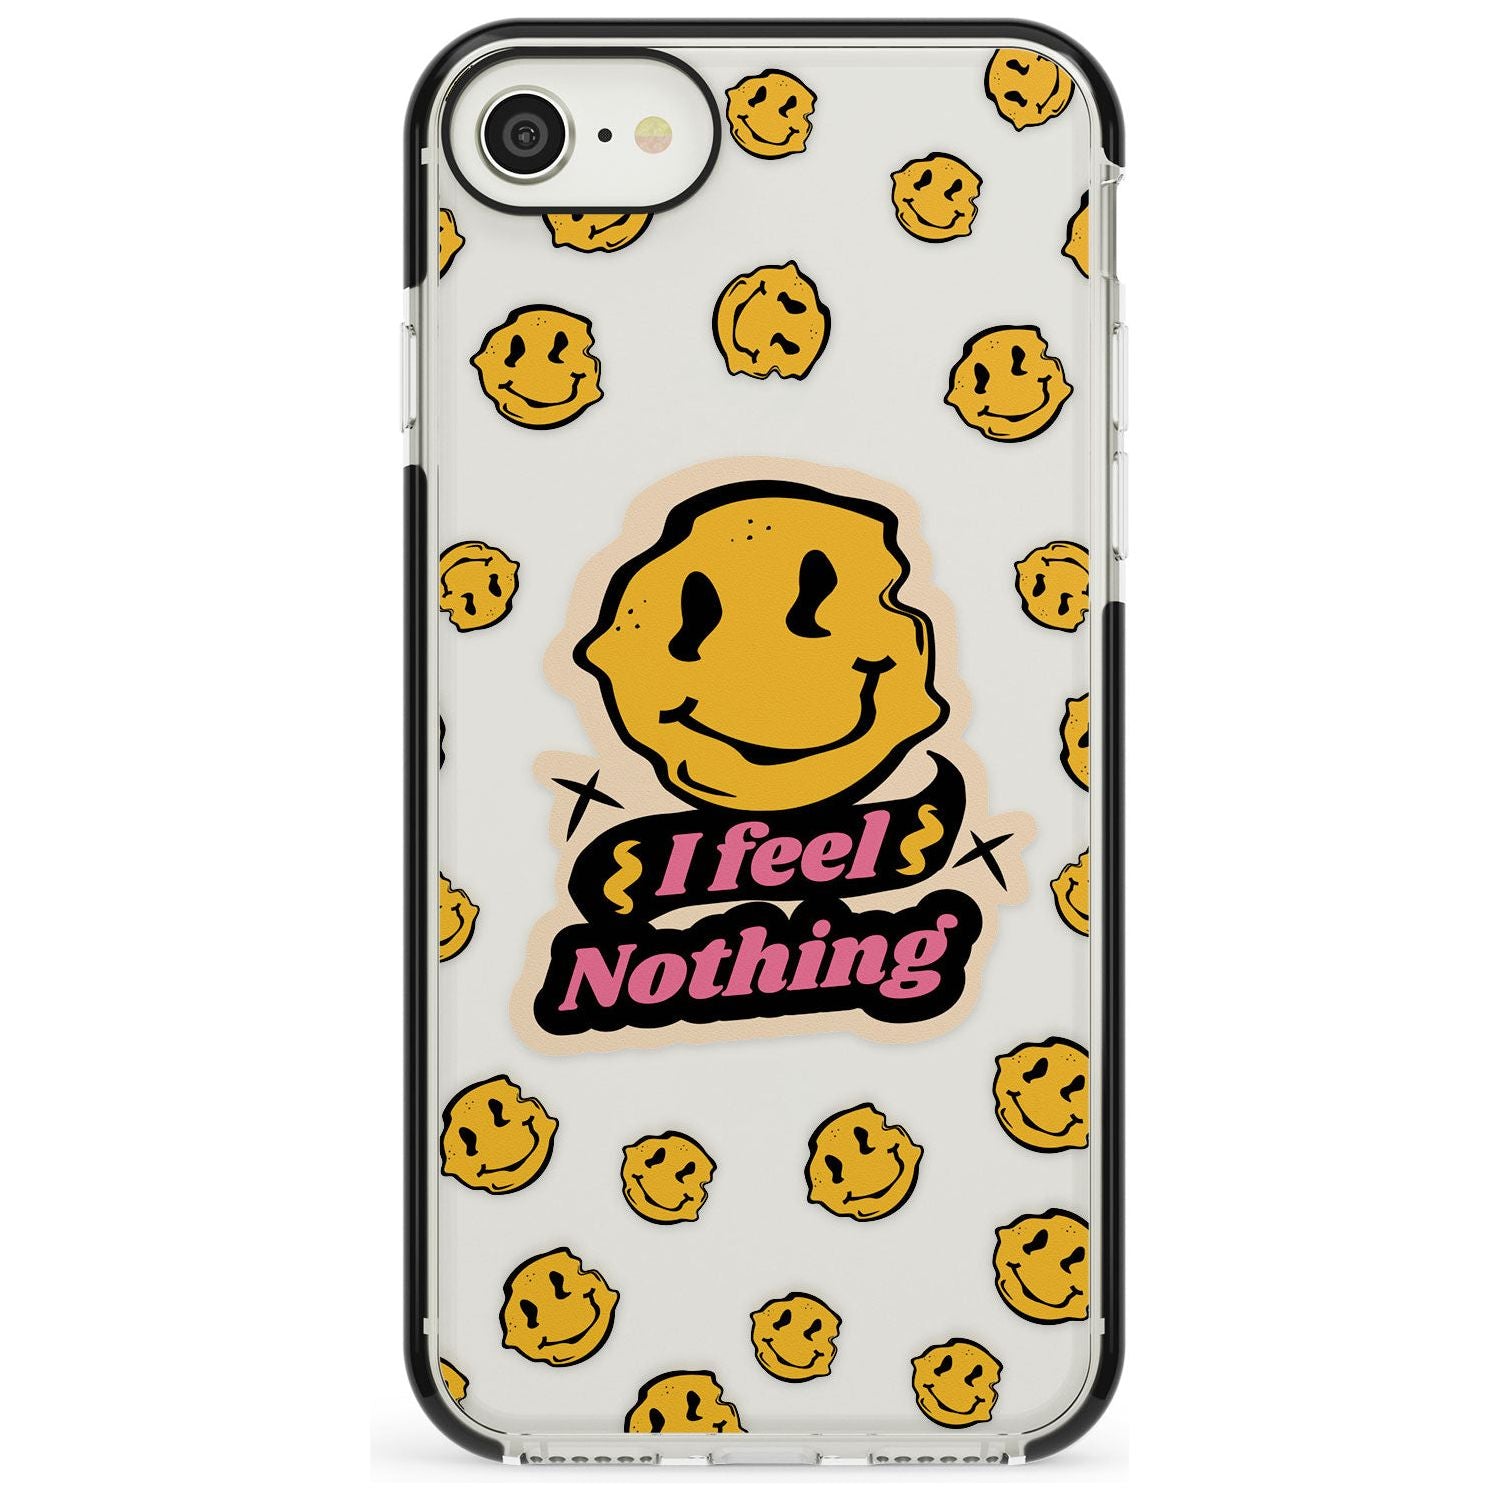 I feel nothing (Clear) Black Impact Phone Case for iPhone SE 8 7 Plus